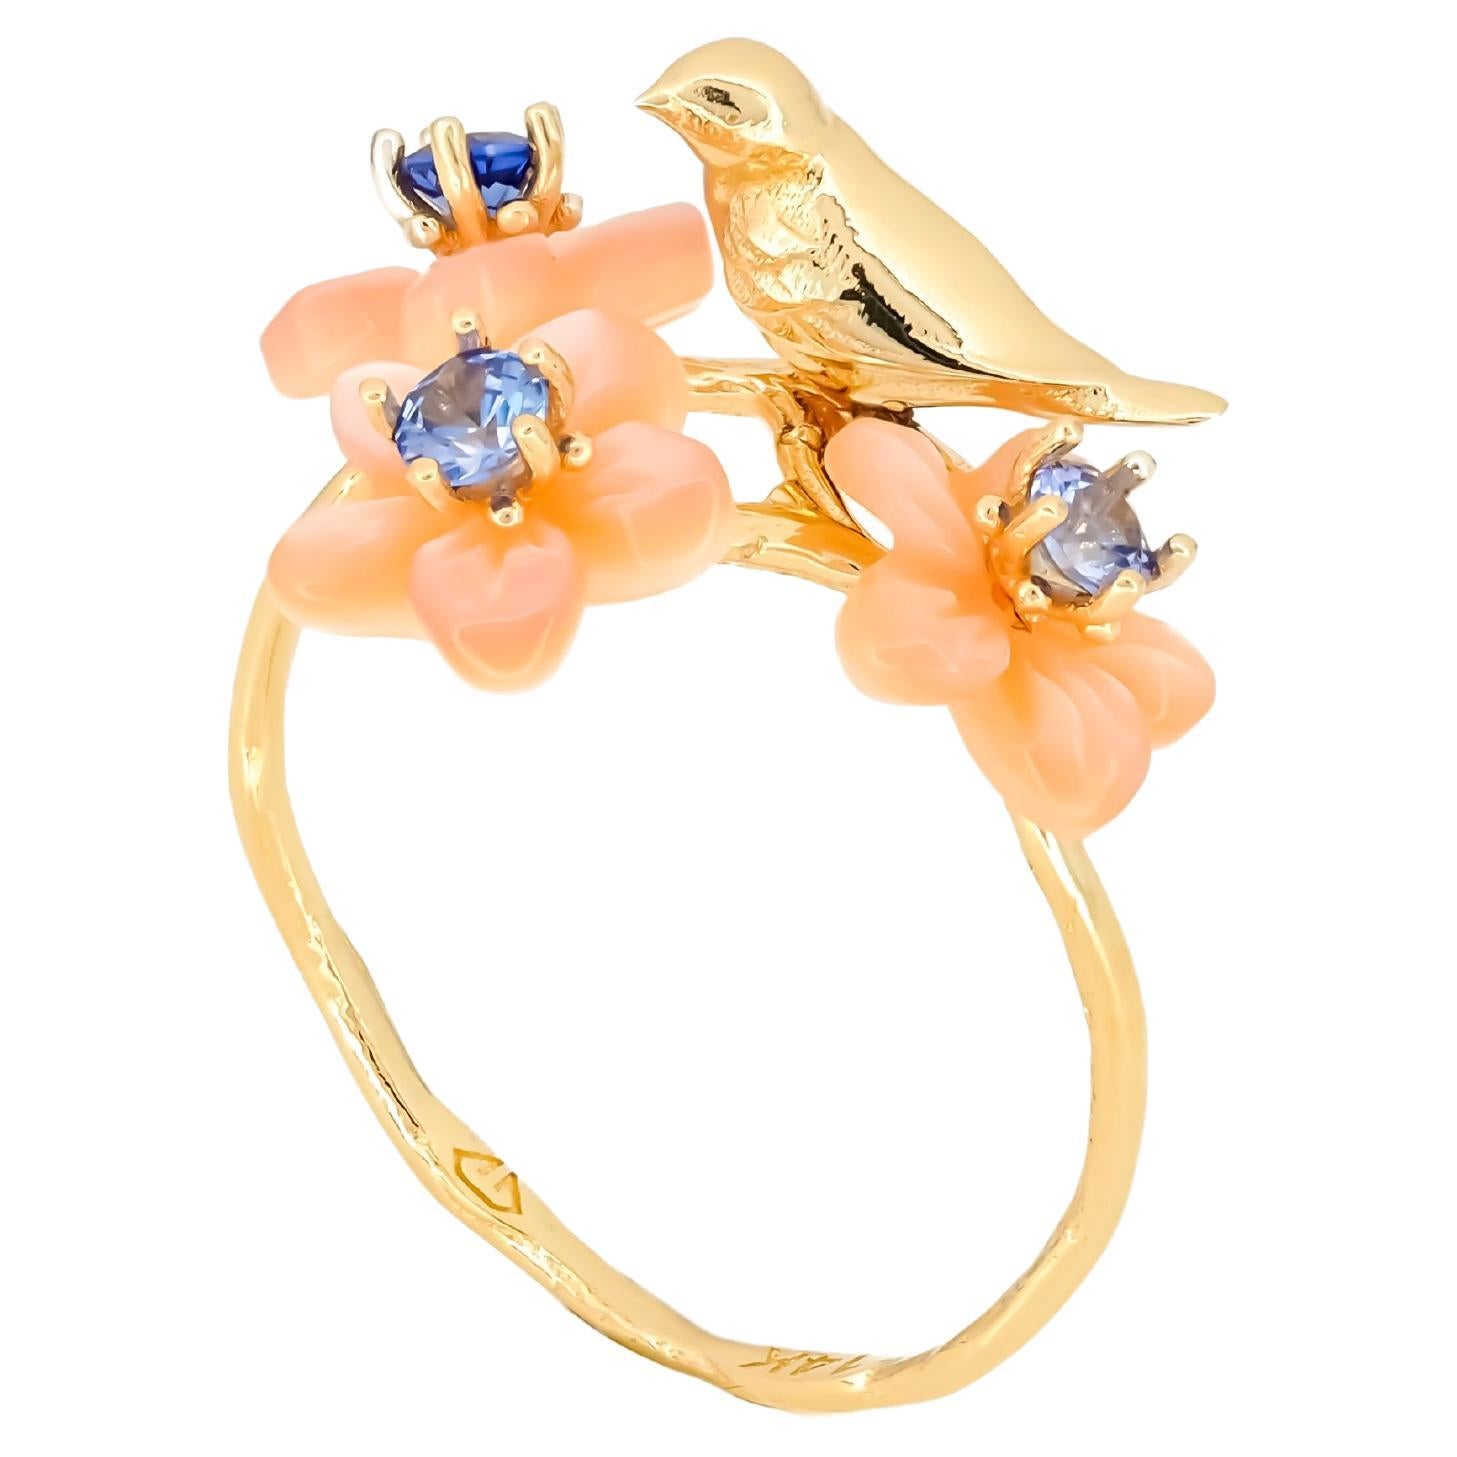 For Sale:  14k Gold Bird on Branch Ring. Sapphires and Carved Mother of Pearl ring!